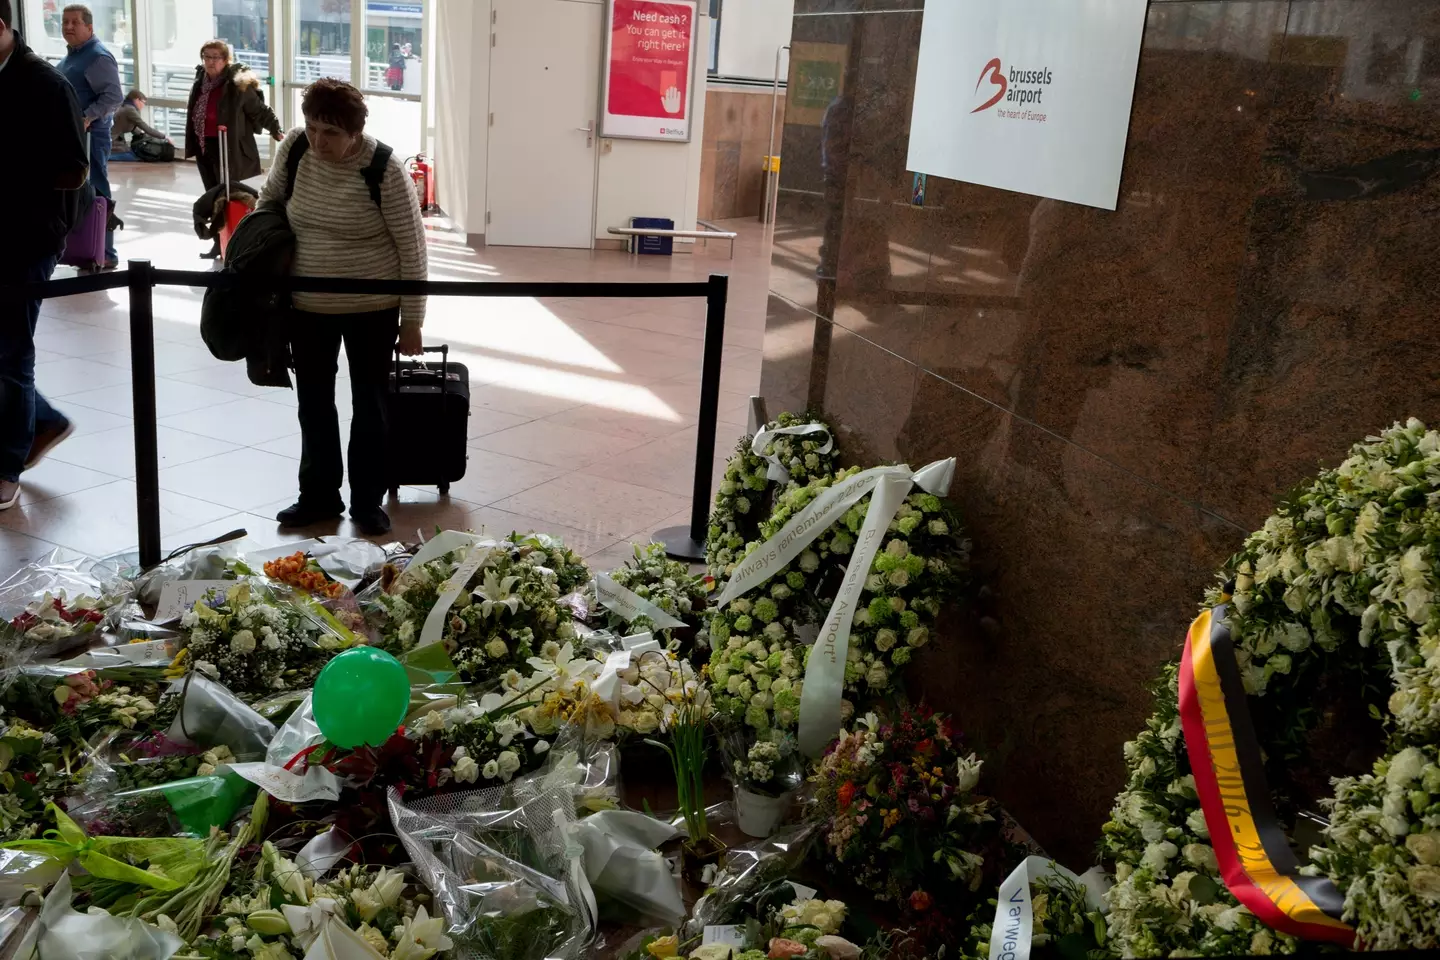 Tributes left for the victims who lost their lives.